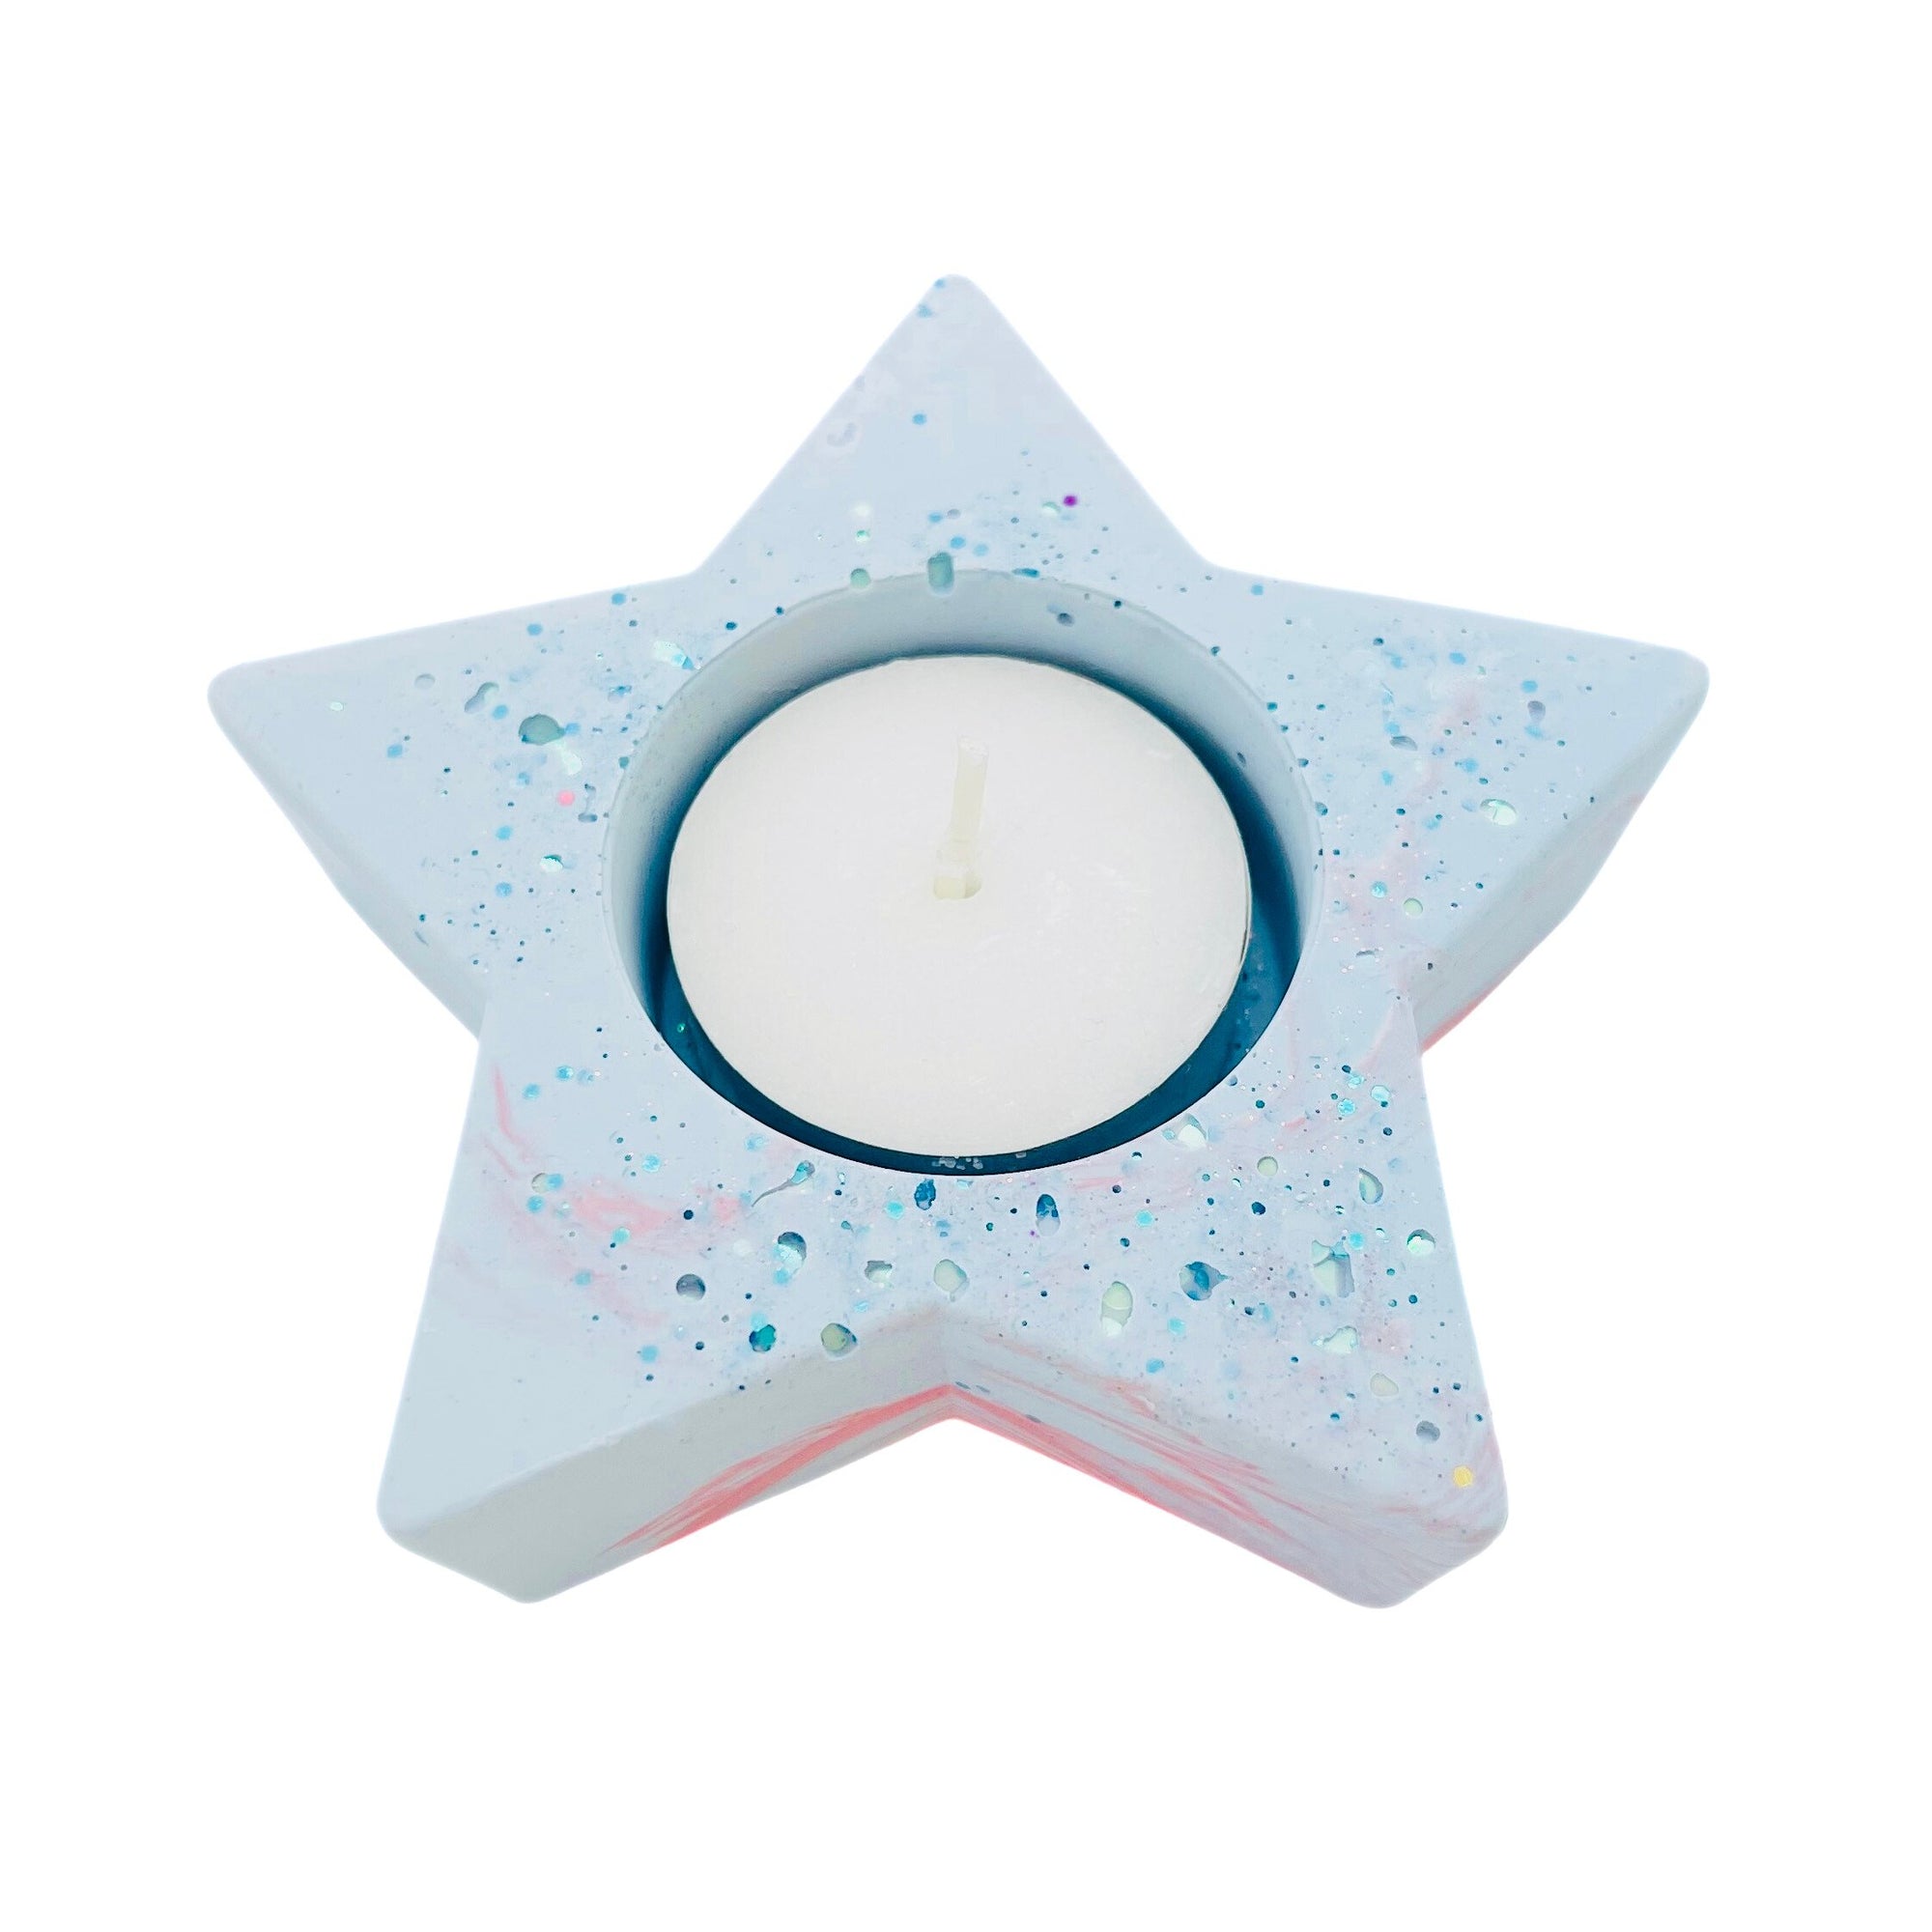 A star shaped Jesmonite tealight holder measuring 10cm in width marbled with powder blue and coral pigment sprinkled with blue glitter.